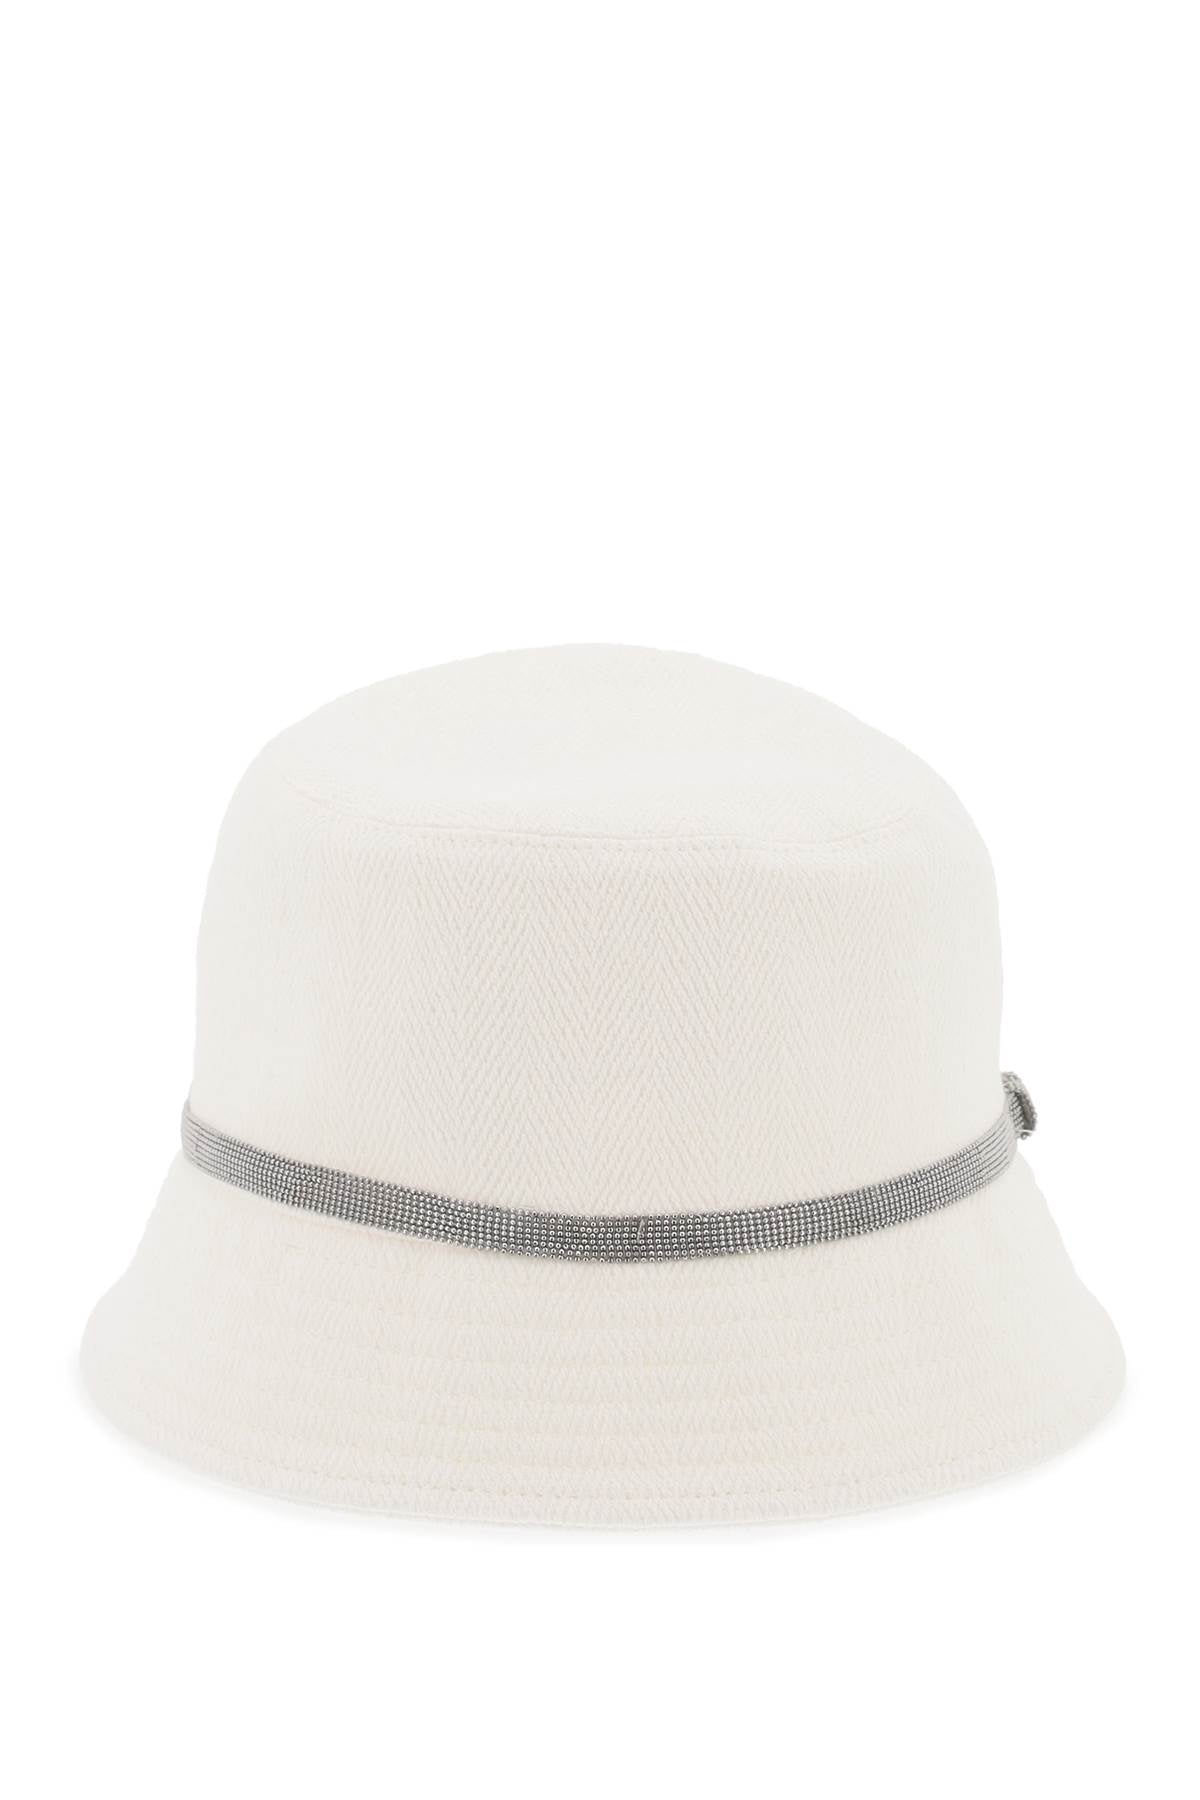 Brunello cucinelli shiny band bucket hat with-women > accessories > hats and hair accessories > hats-Brunello Cucinelli-l-White-Urbanheer